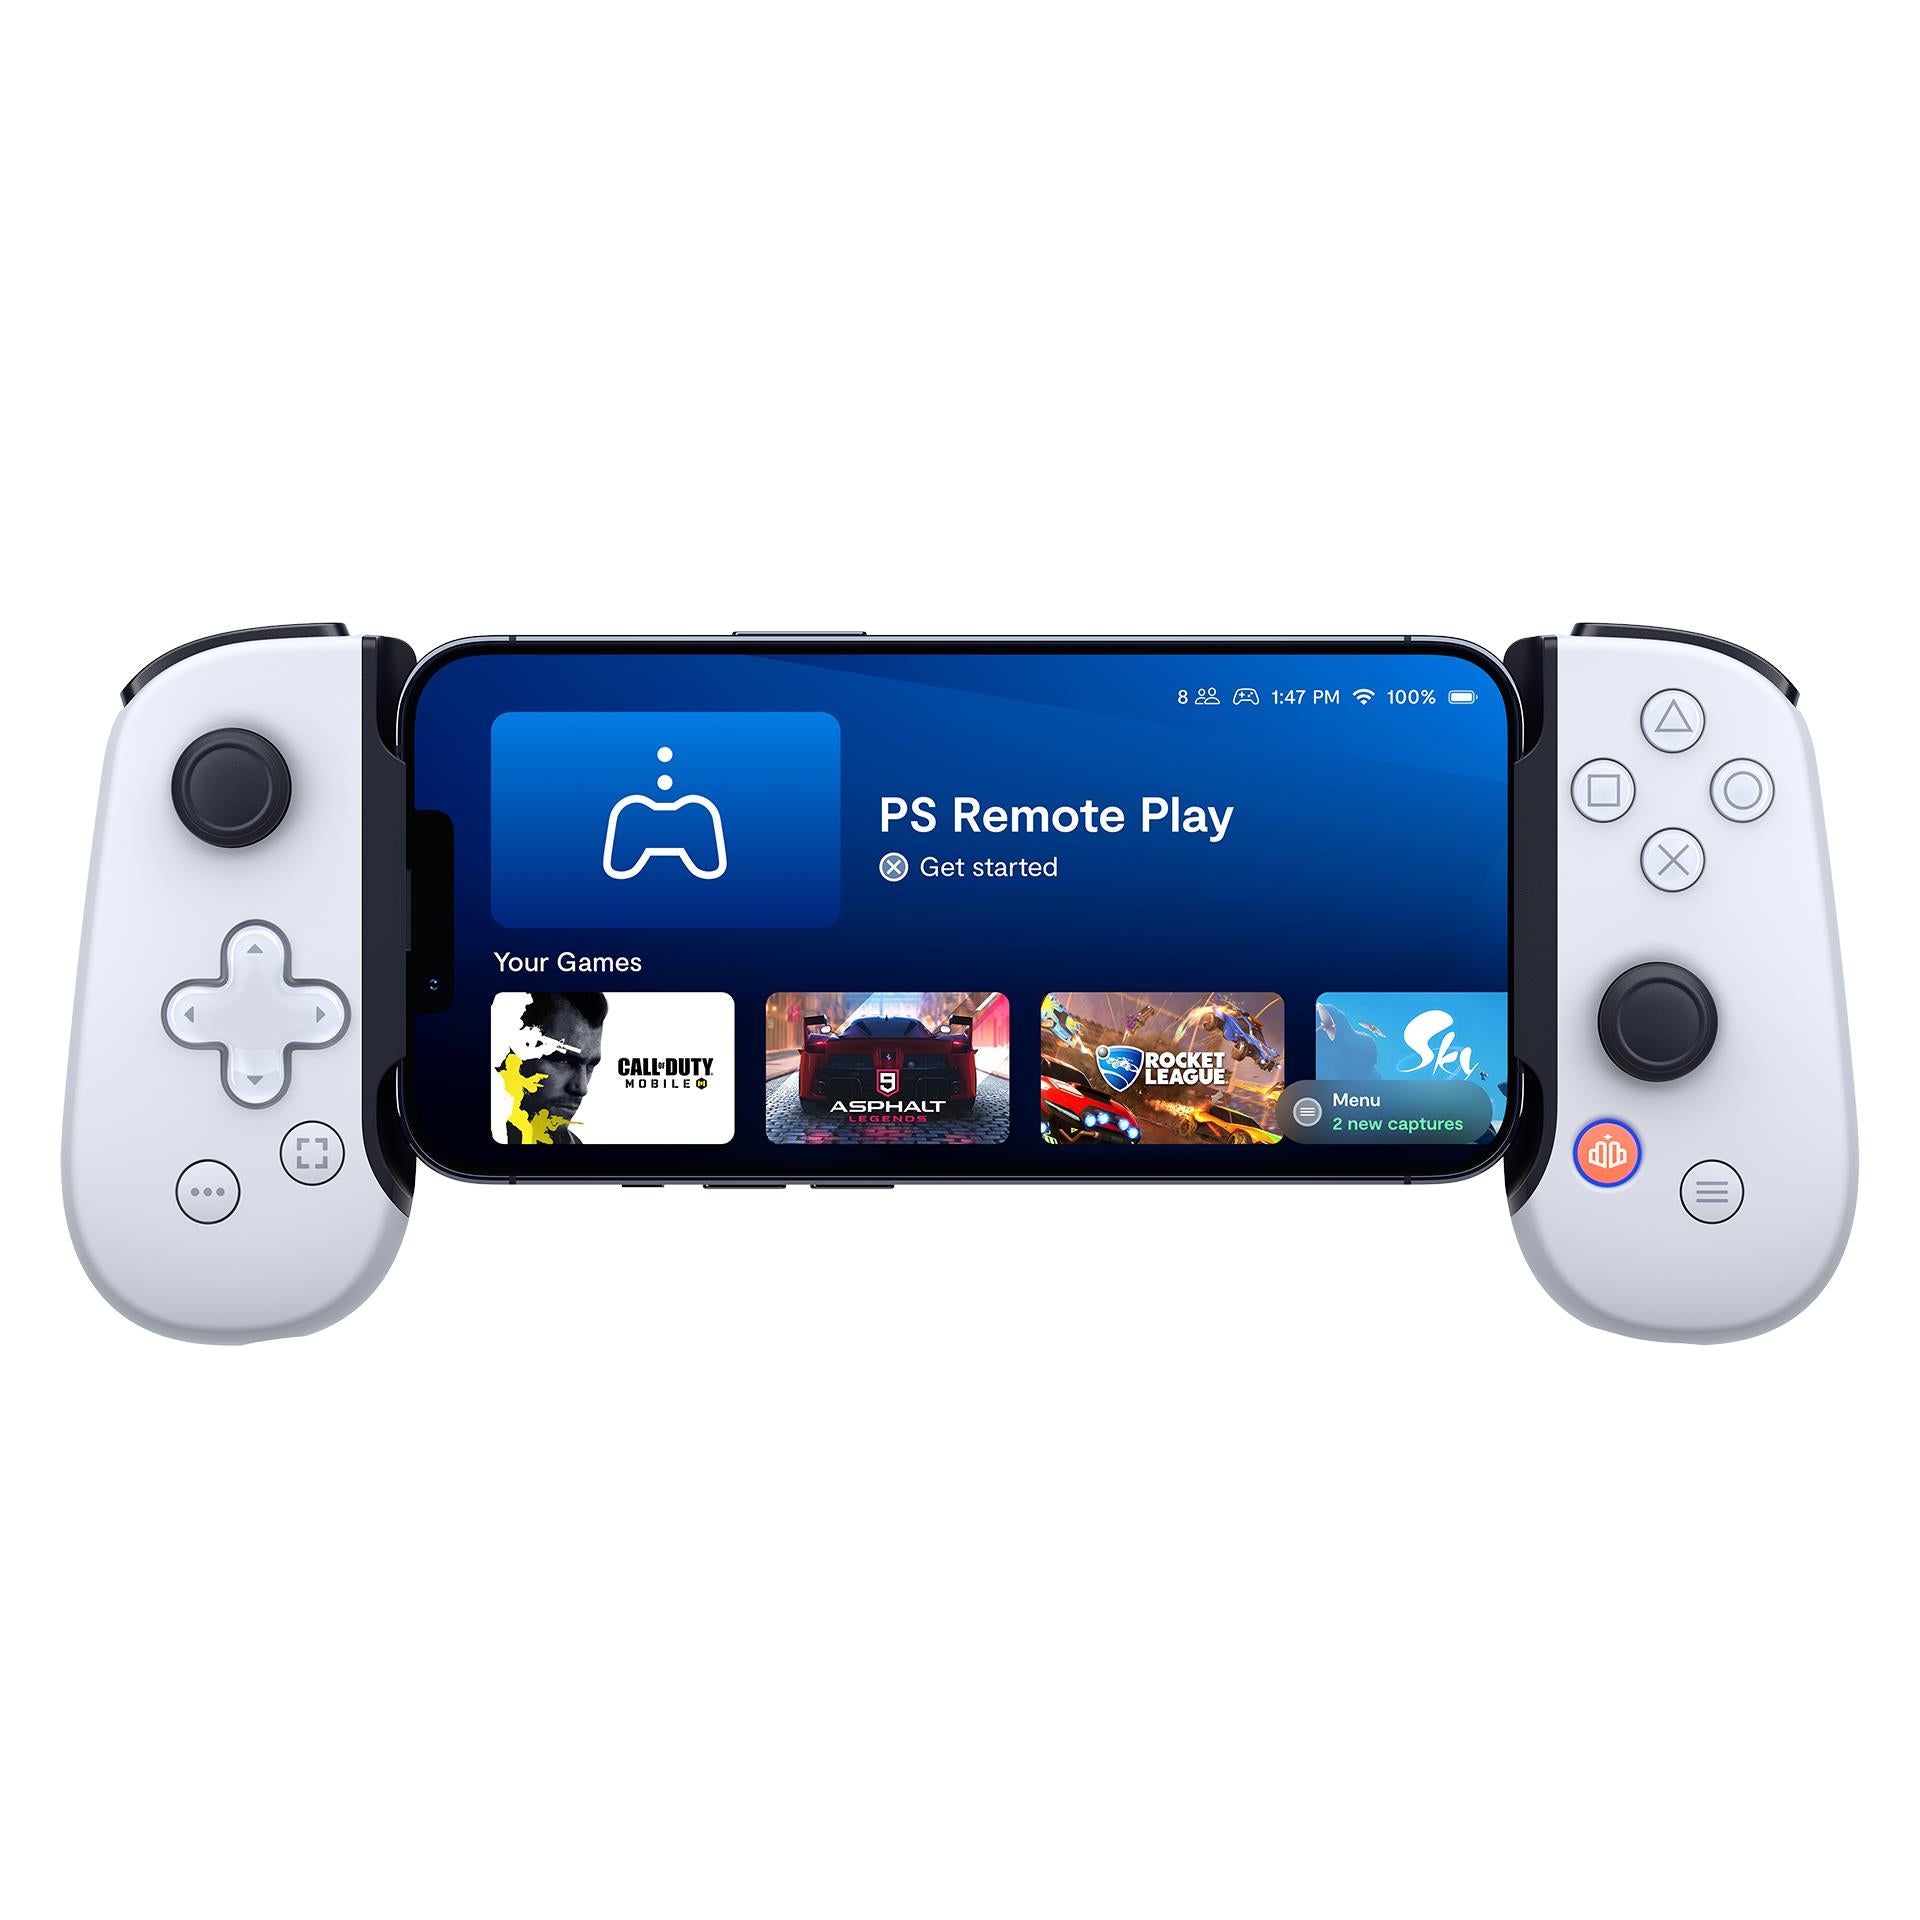 backbone one mobile gaming controller for iphone - playstation edition